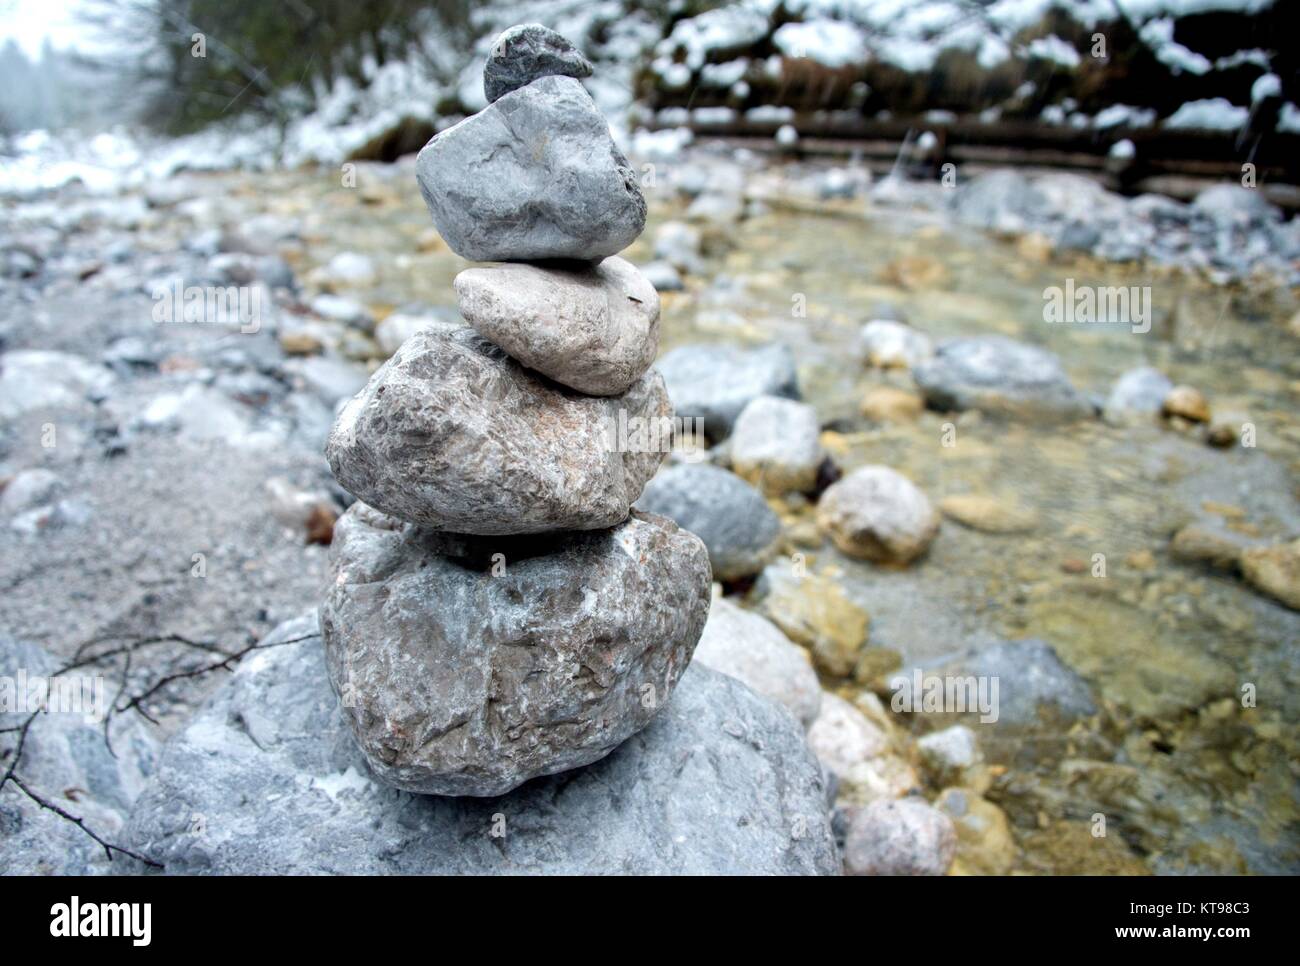 A pile of stones in a mountain creek at lake Königssee near Schönau (Germany), 08 December 2017. | usage worldwide Stock Photo